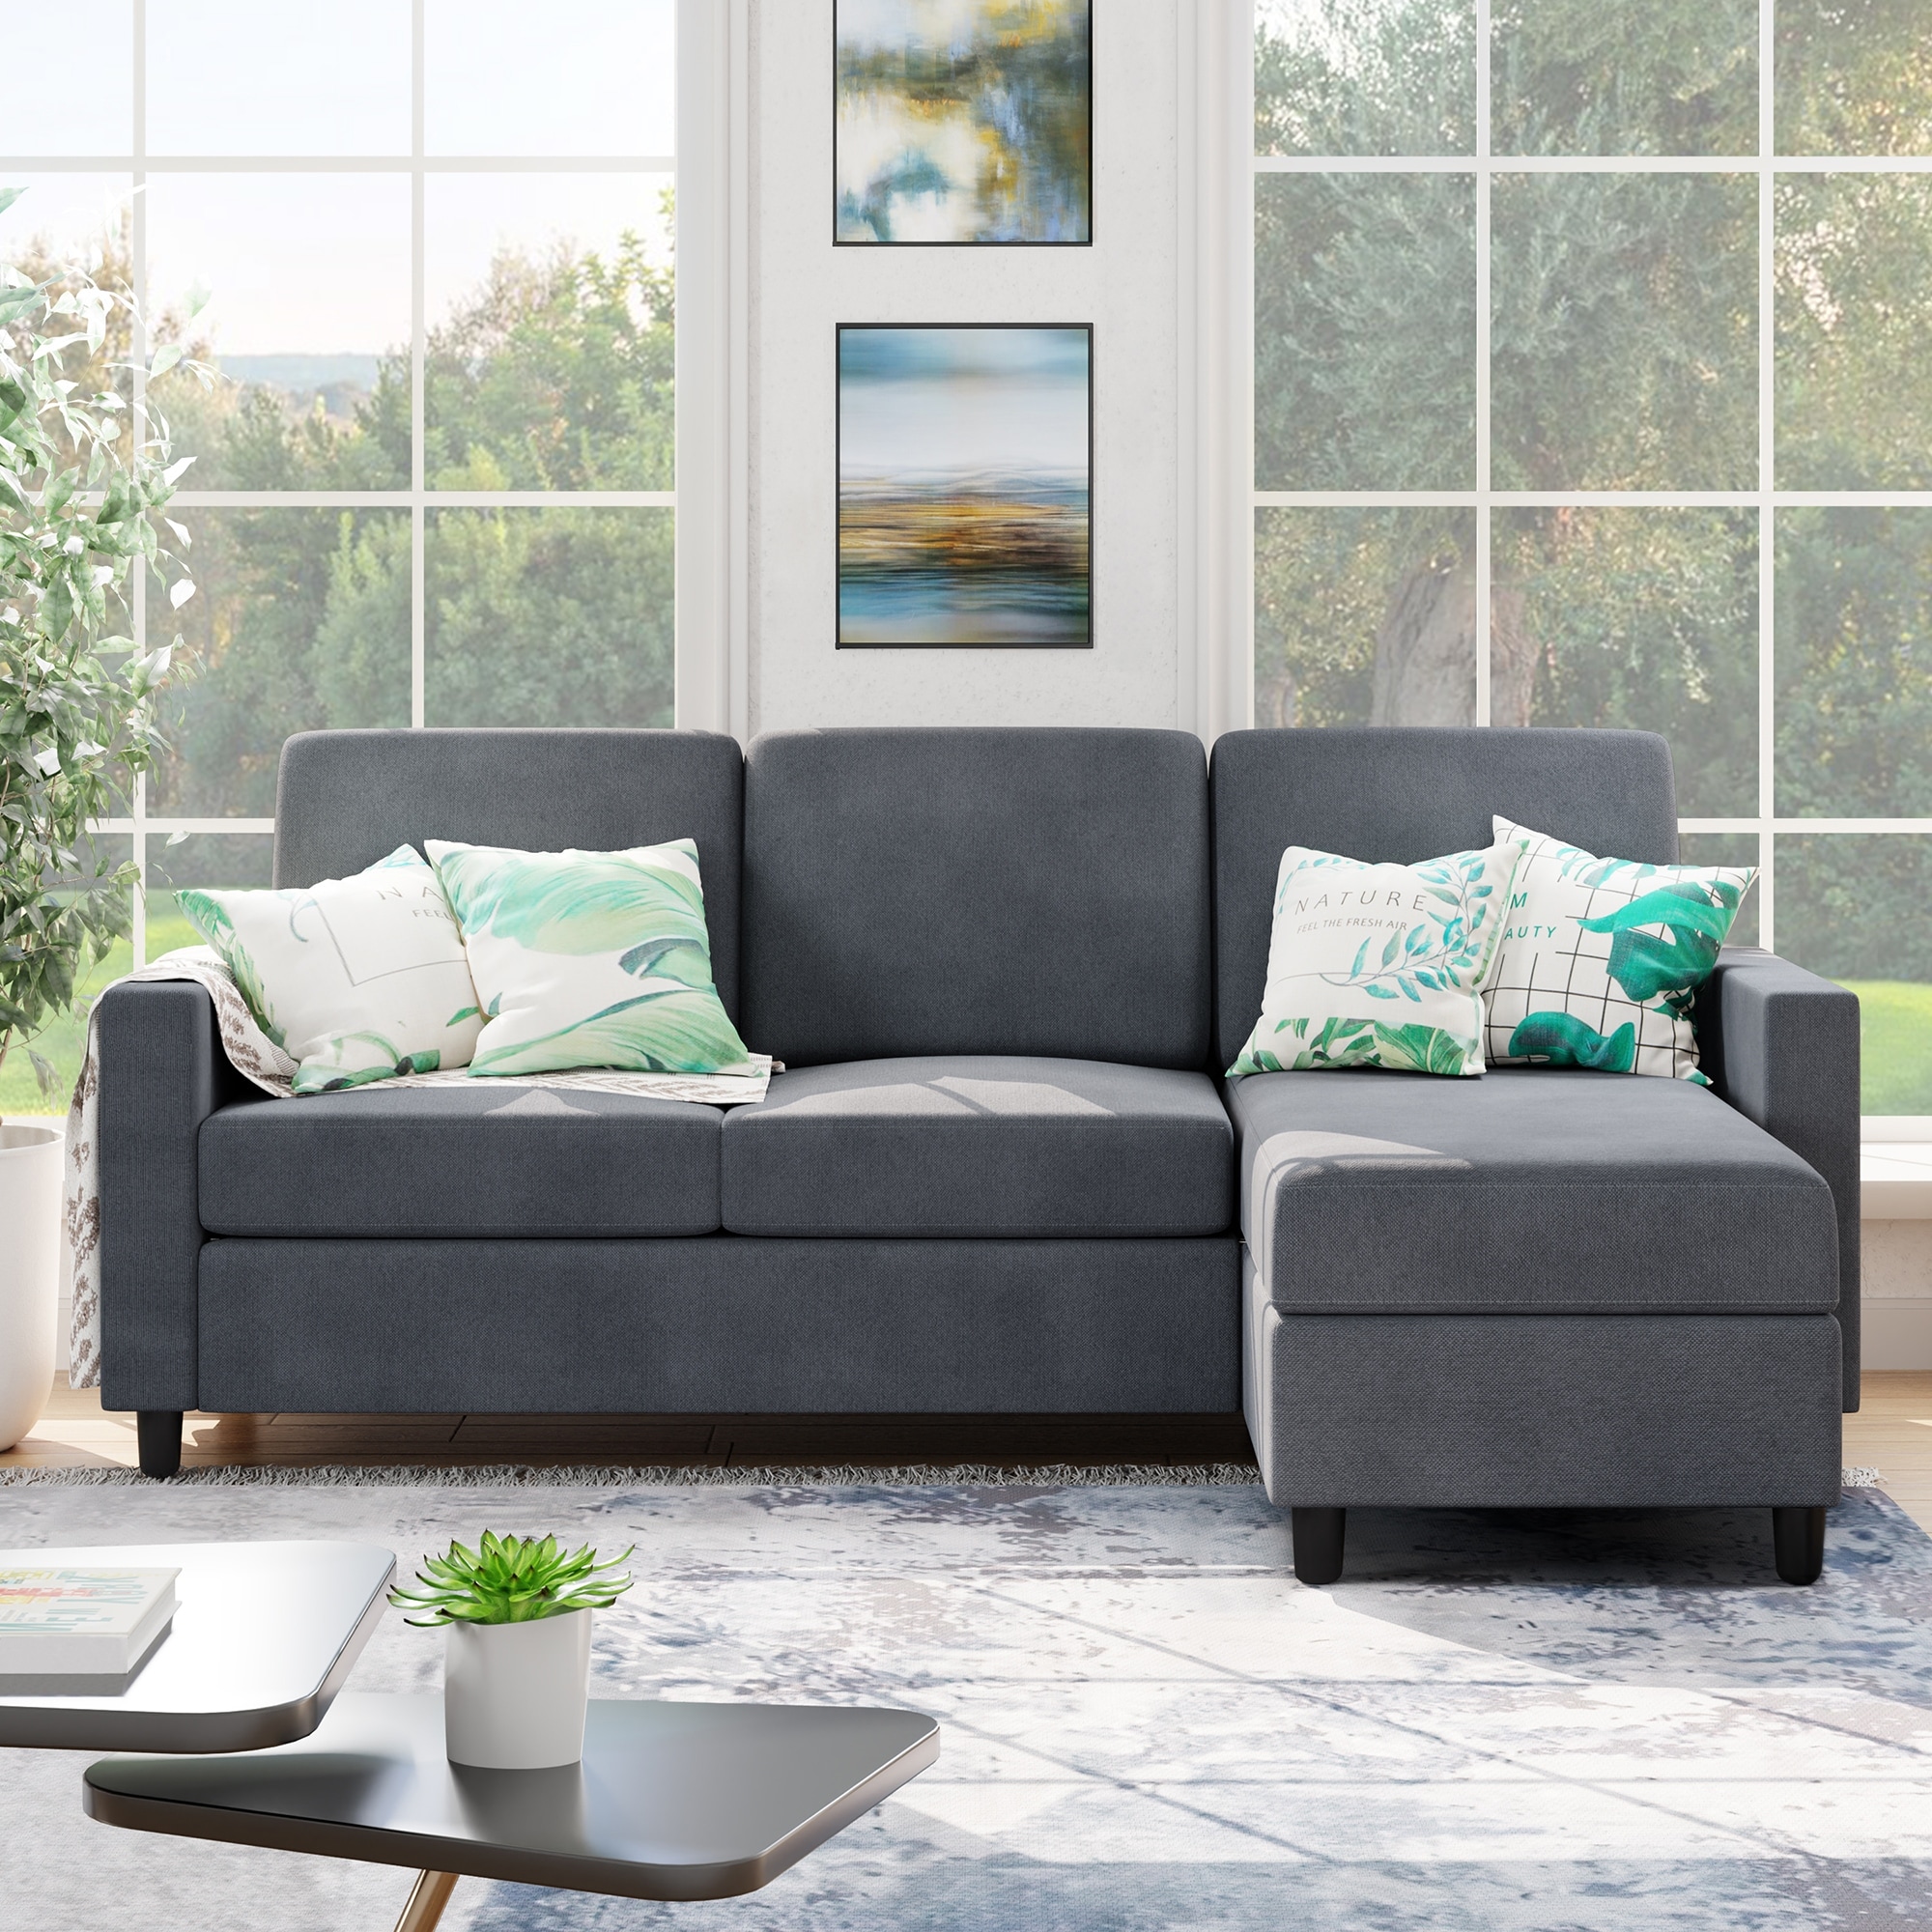 75 Modern Sectional Sofa Couch, 4-Seat L-Shaped Upholstered Couch Set with 3 Free Pillows, Beige-ModernLuxe